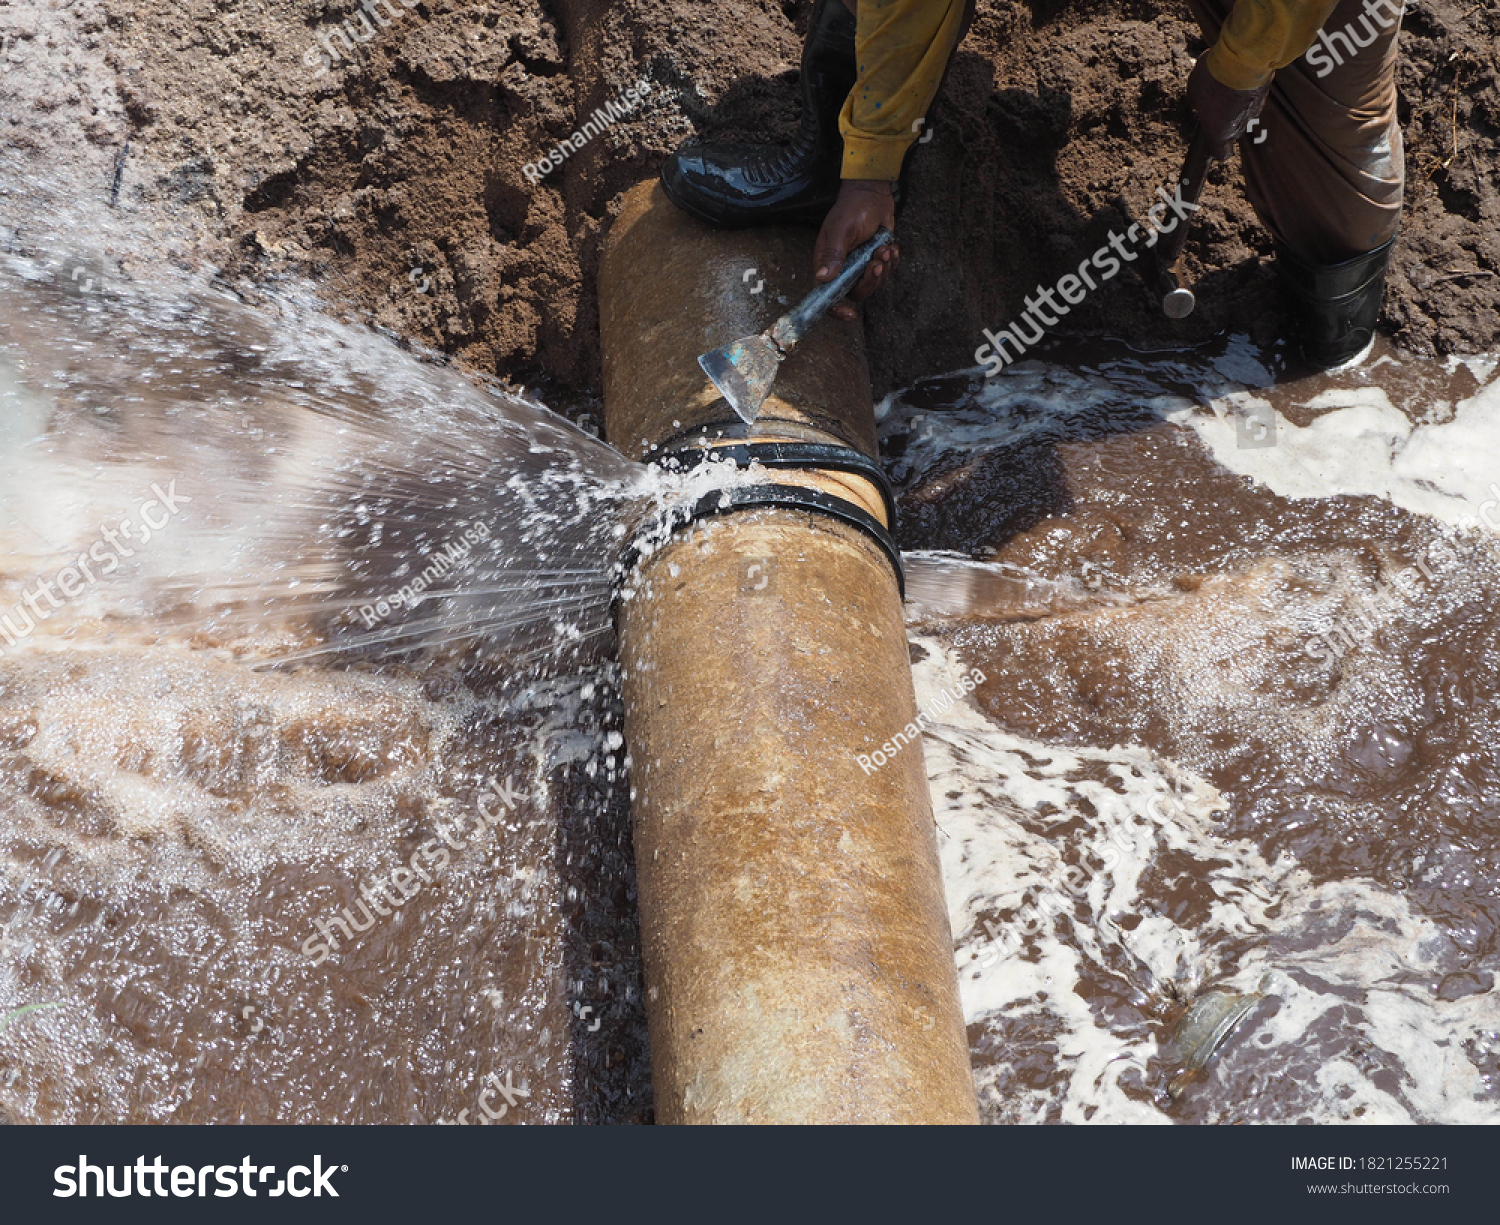 The main pipe is broken or burst and is being repaired #1821255221